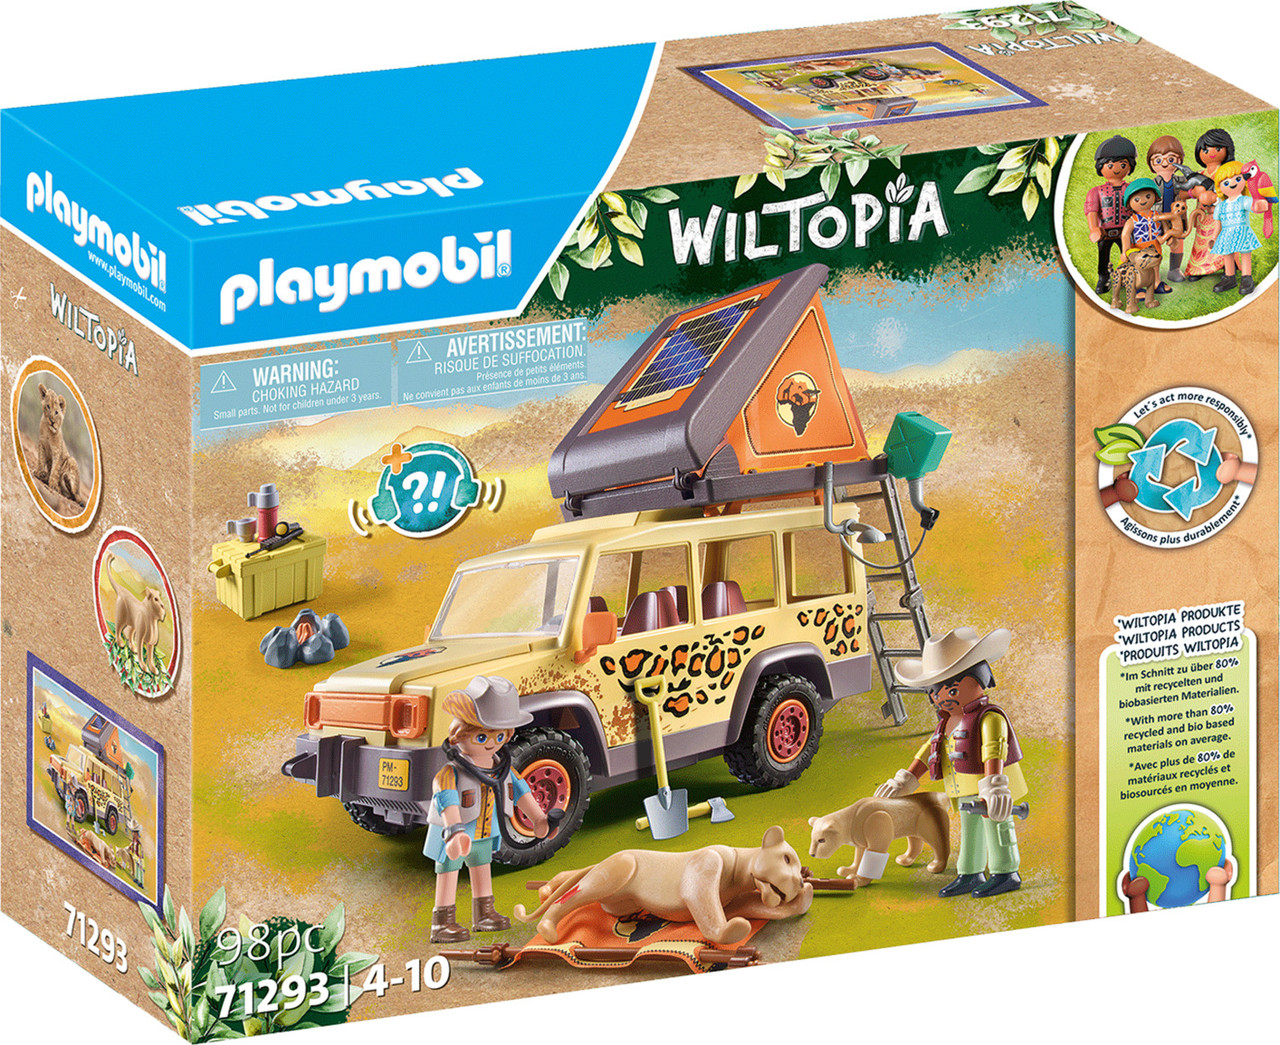 The more you spend, the more you save! - PLAYMOBIL US